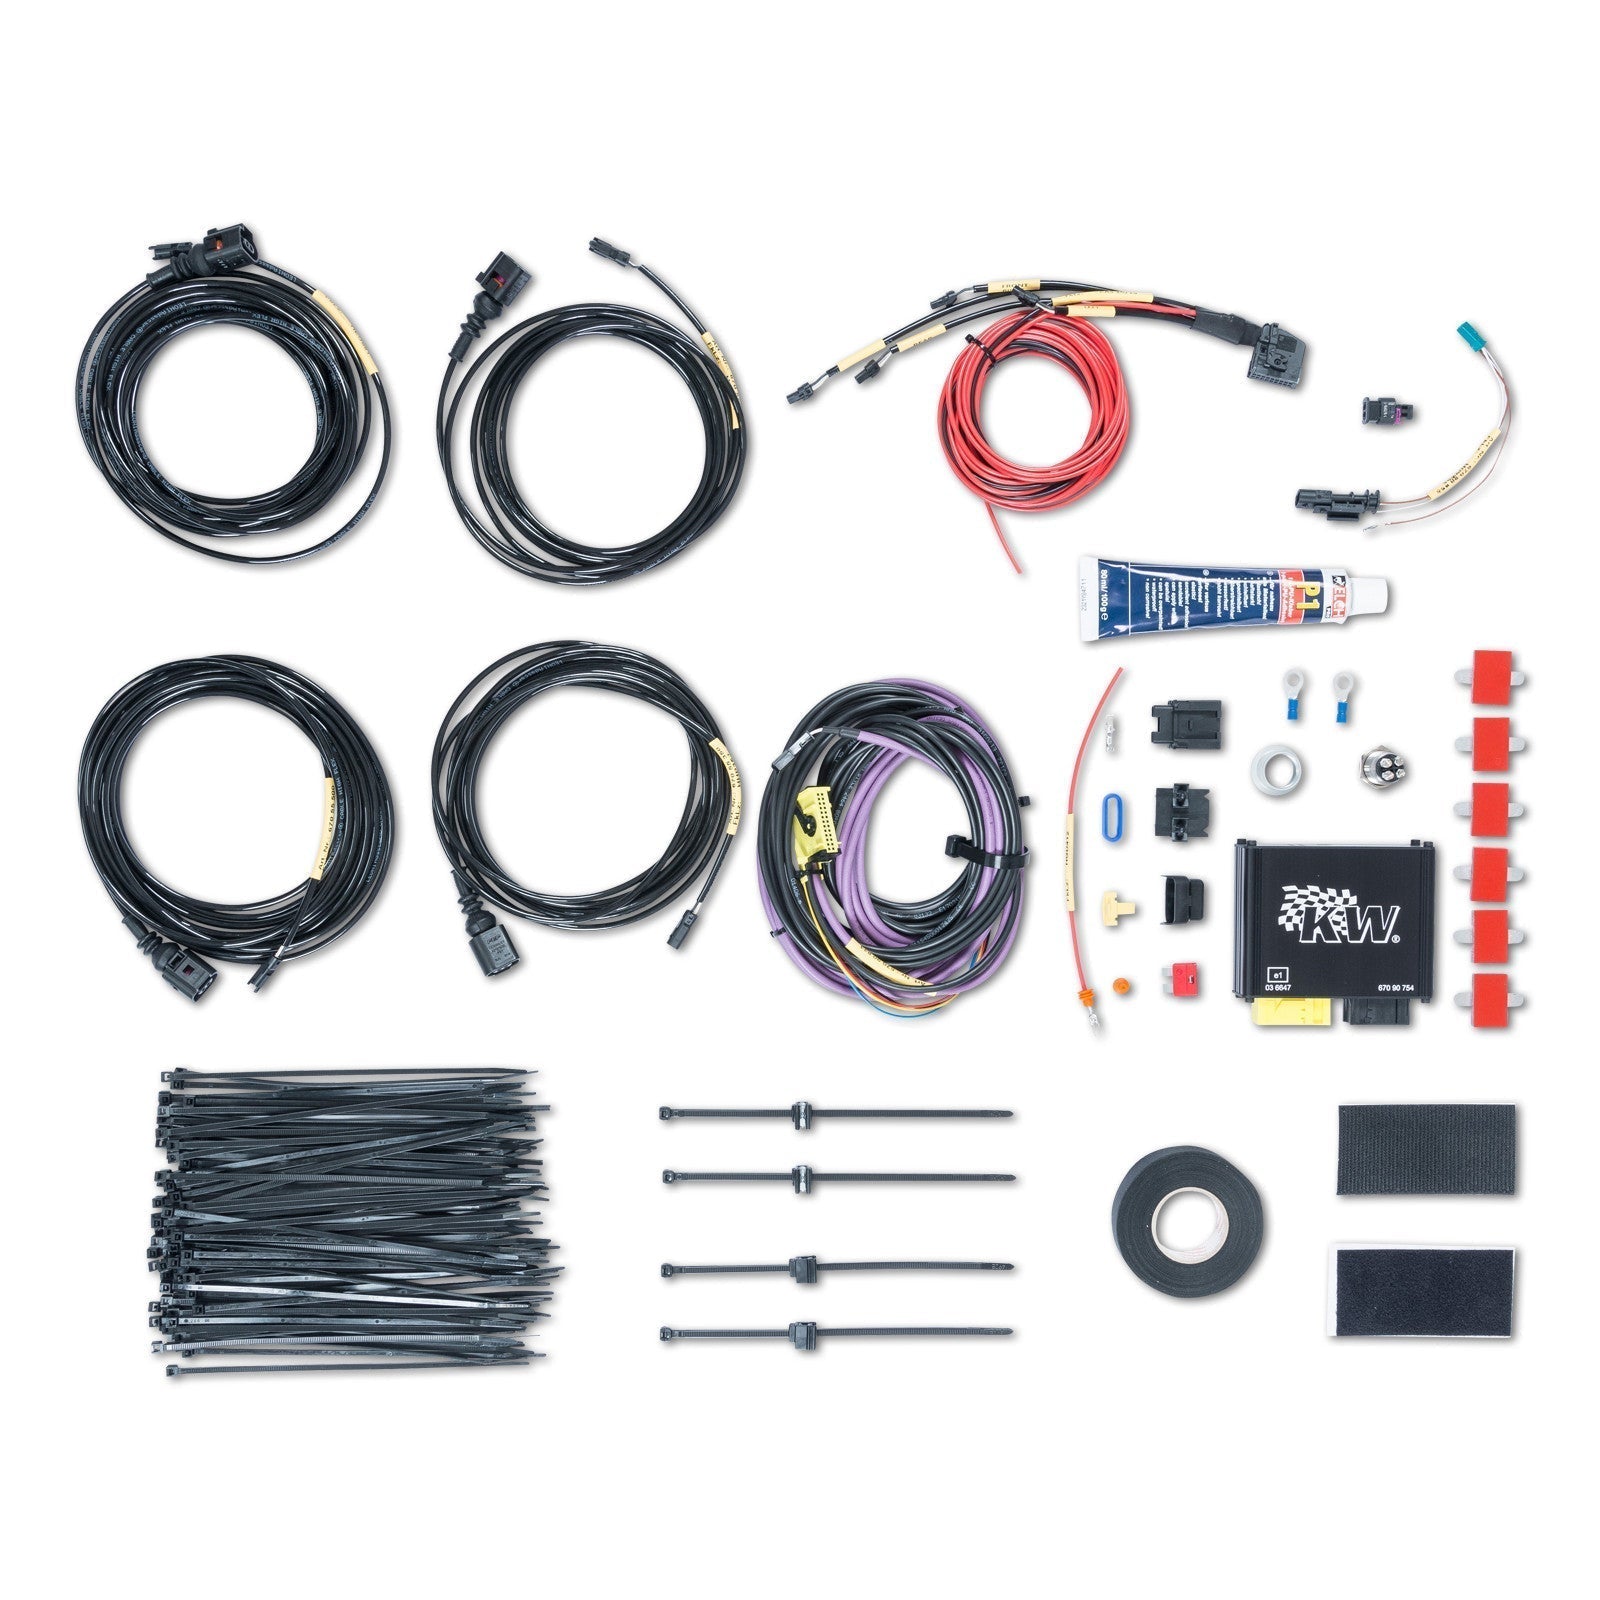 KW DCC ECU Coilover Kit - MK6 Golf R without DCC